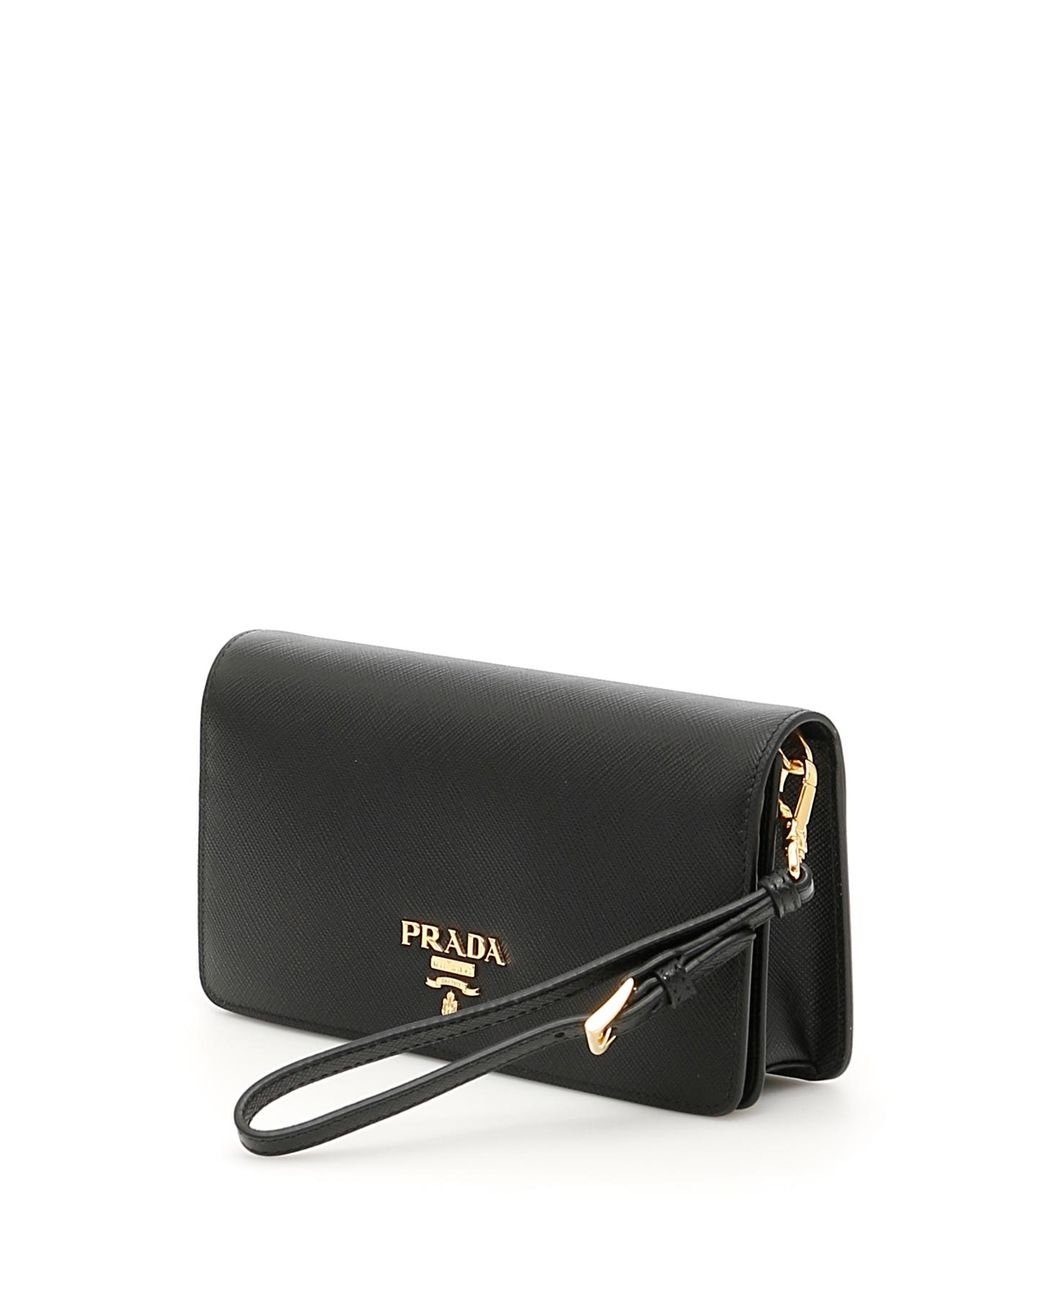 Prada Saffiano And Leather Wallet With Shoulder Strap - Black